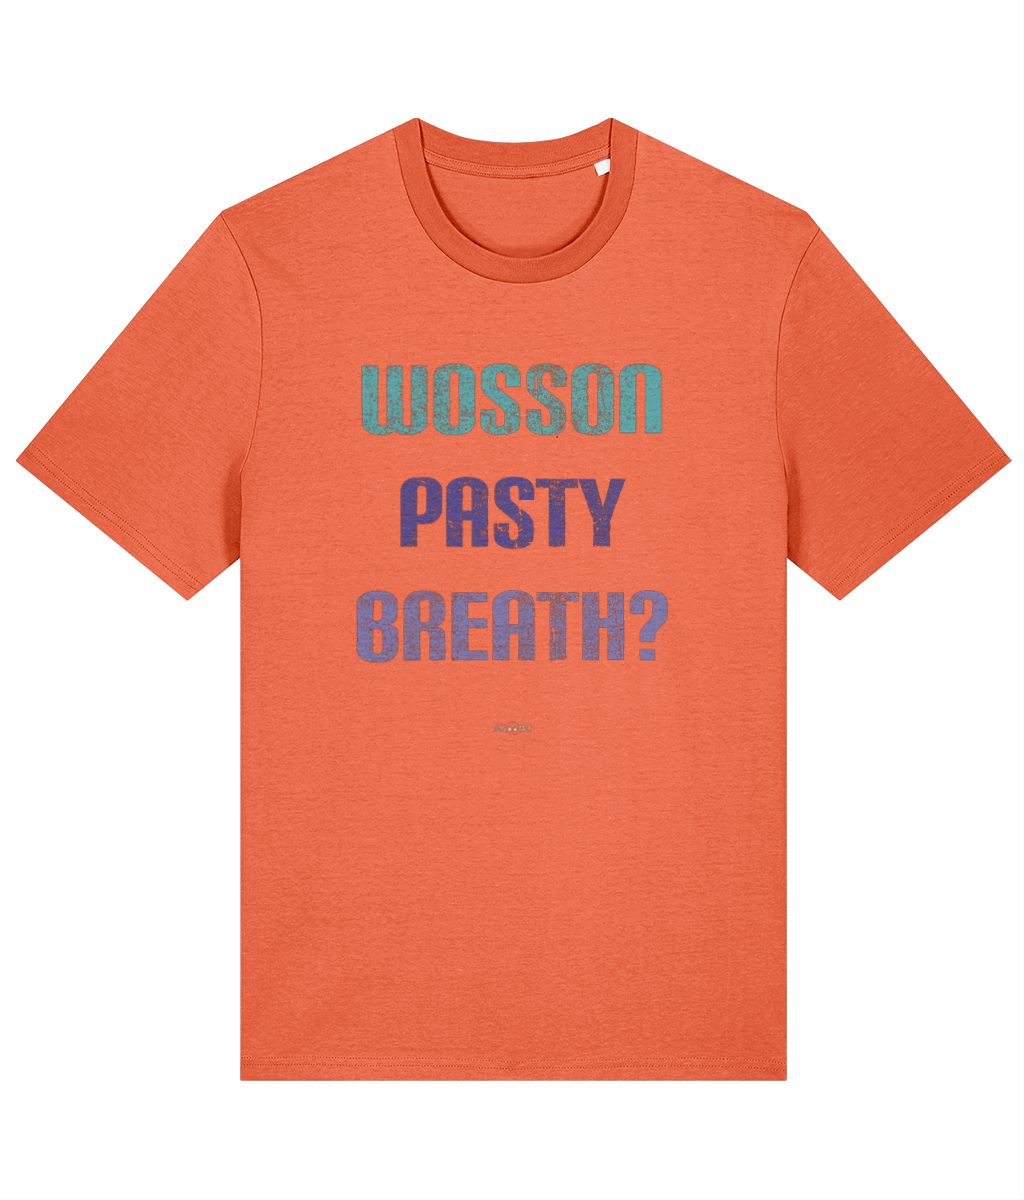 Wosson Pasty Breath? - TussFace T-shirt